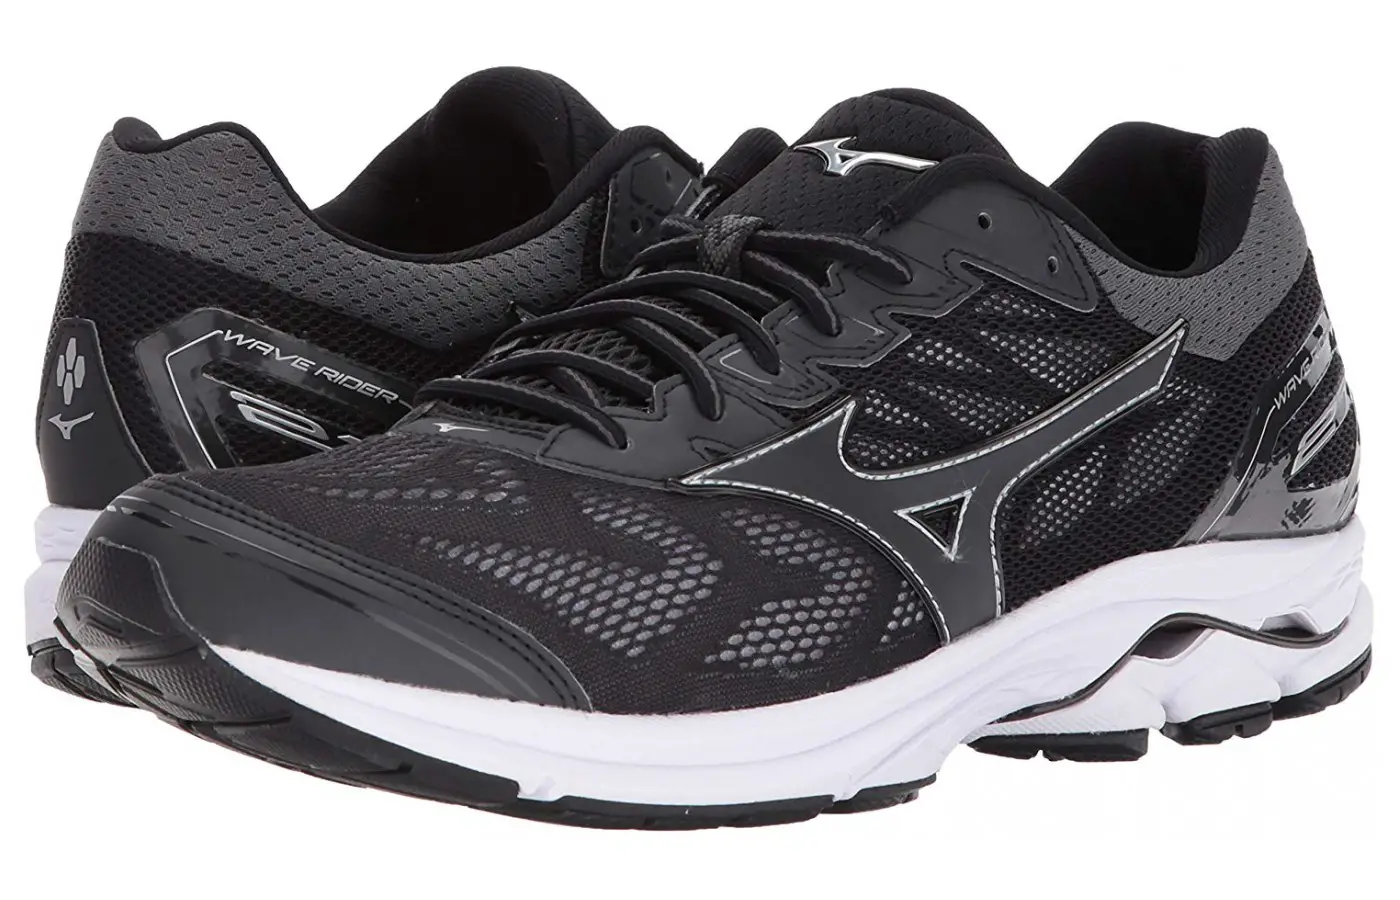 The black color variation of a pair of Mizuno Wave Rider 21s